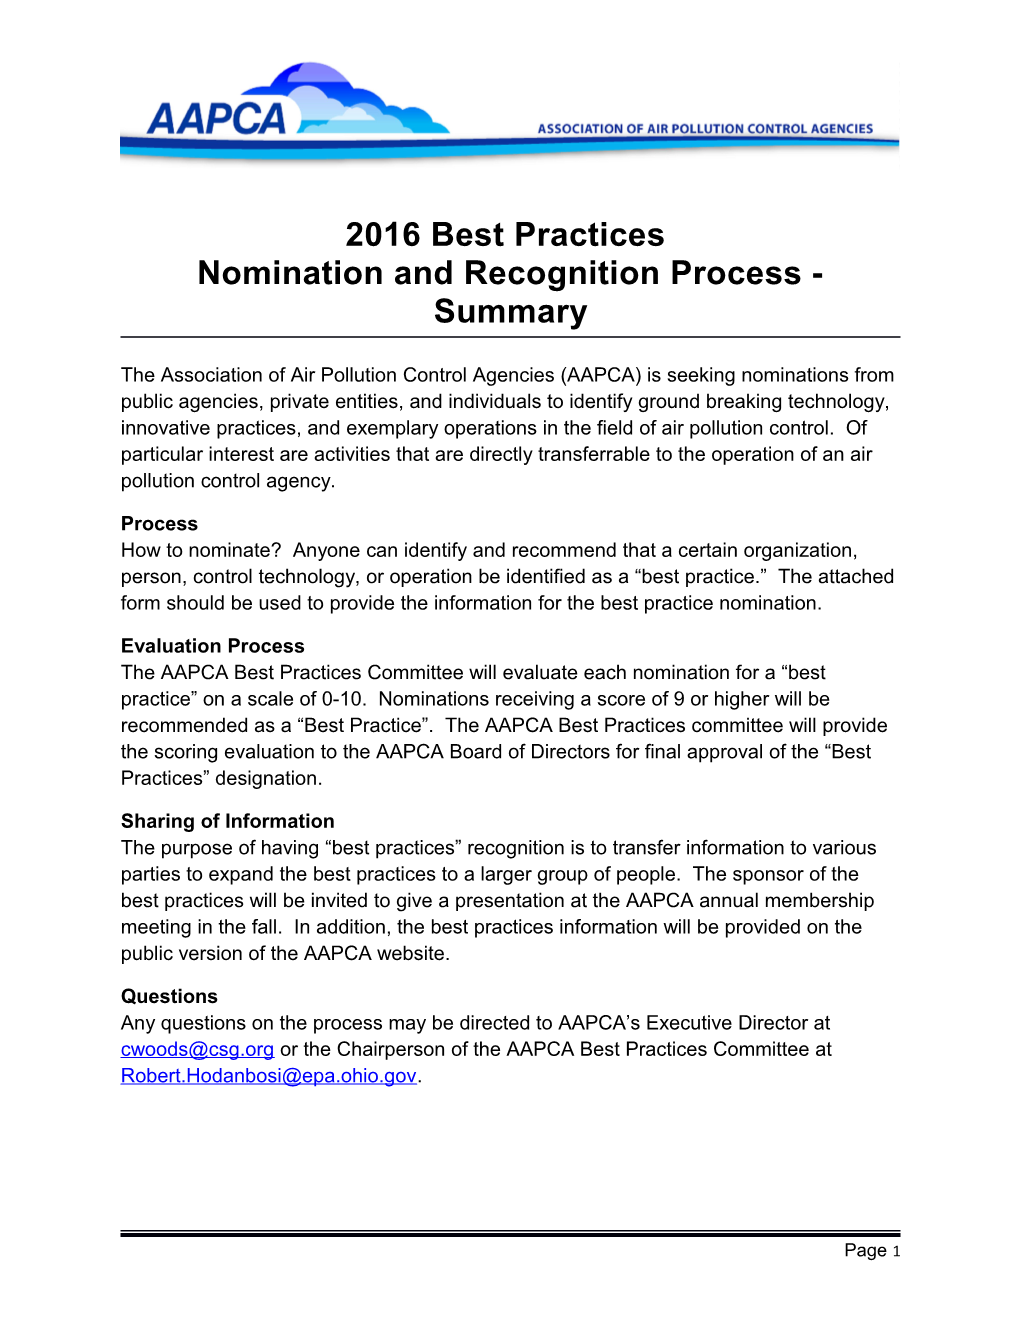 2016 Best Practices Nomination and Recognition Process - Summary